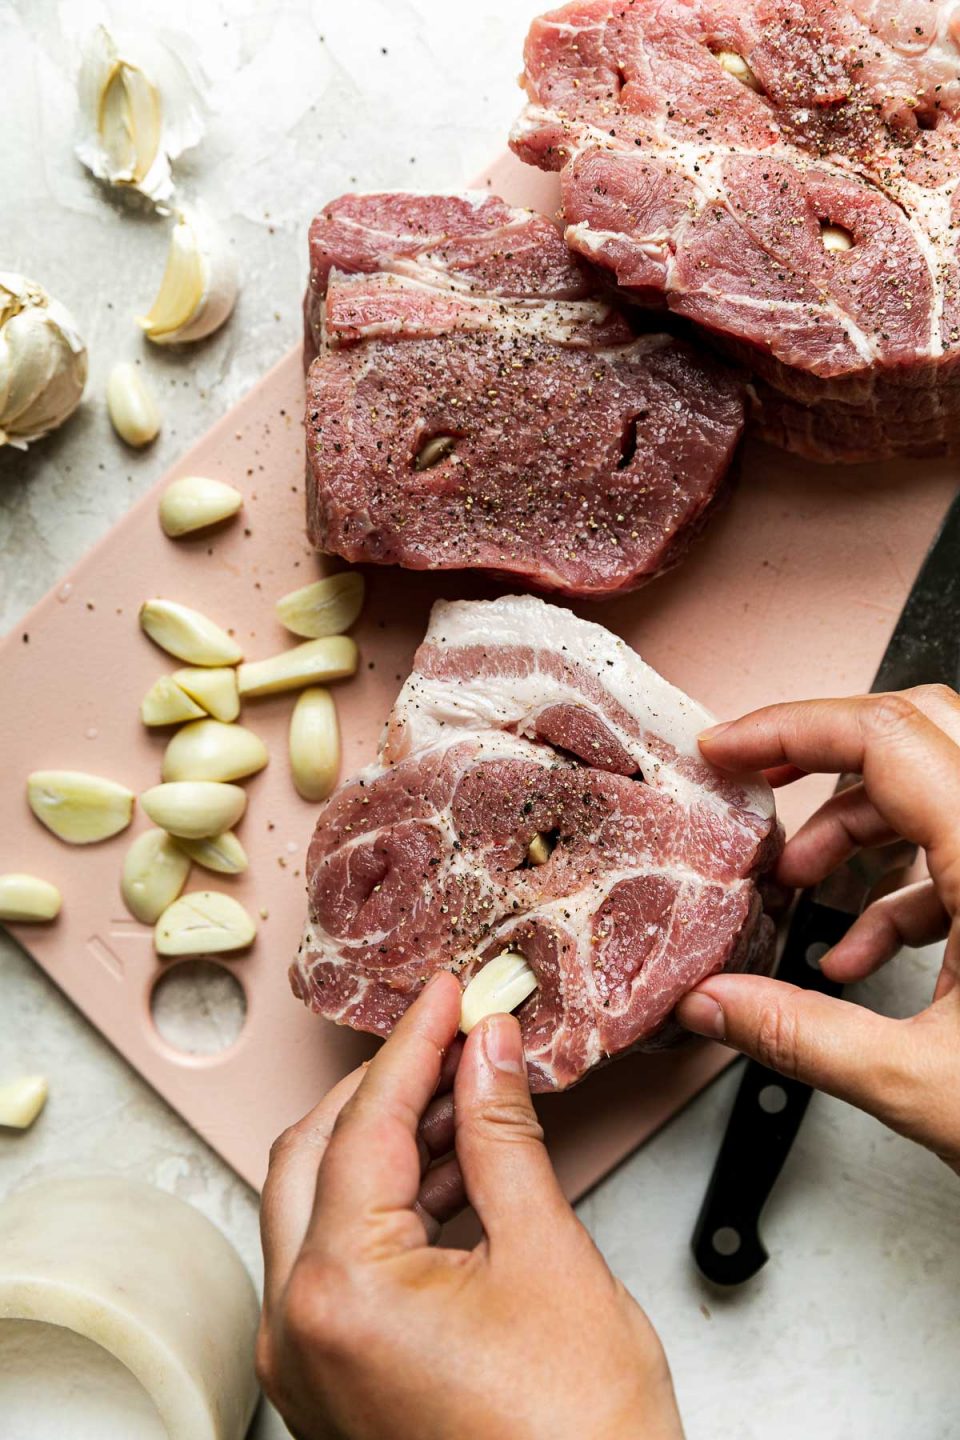 How to make Apple Cider Braised Pork Shoulder, step 1: a woman's hands shown studding pork shoulder roast with garlic cloves. the pork shoulder sits atop a light pink cutting board next to a pile of peeled garlic cloves & a container or kosher salt on a creamy cement surface.